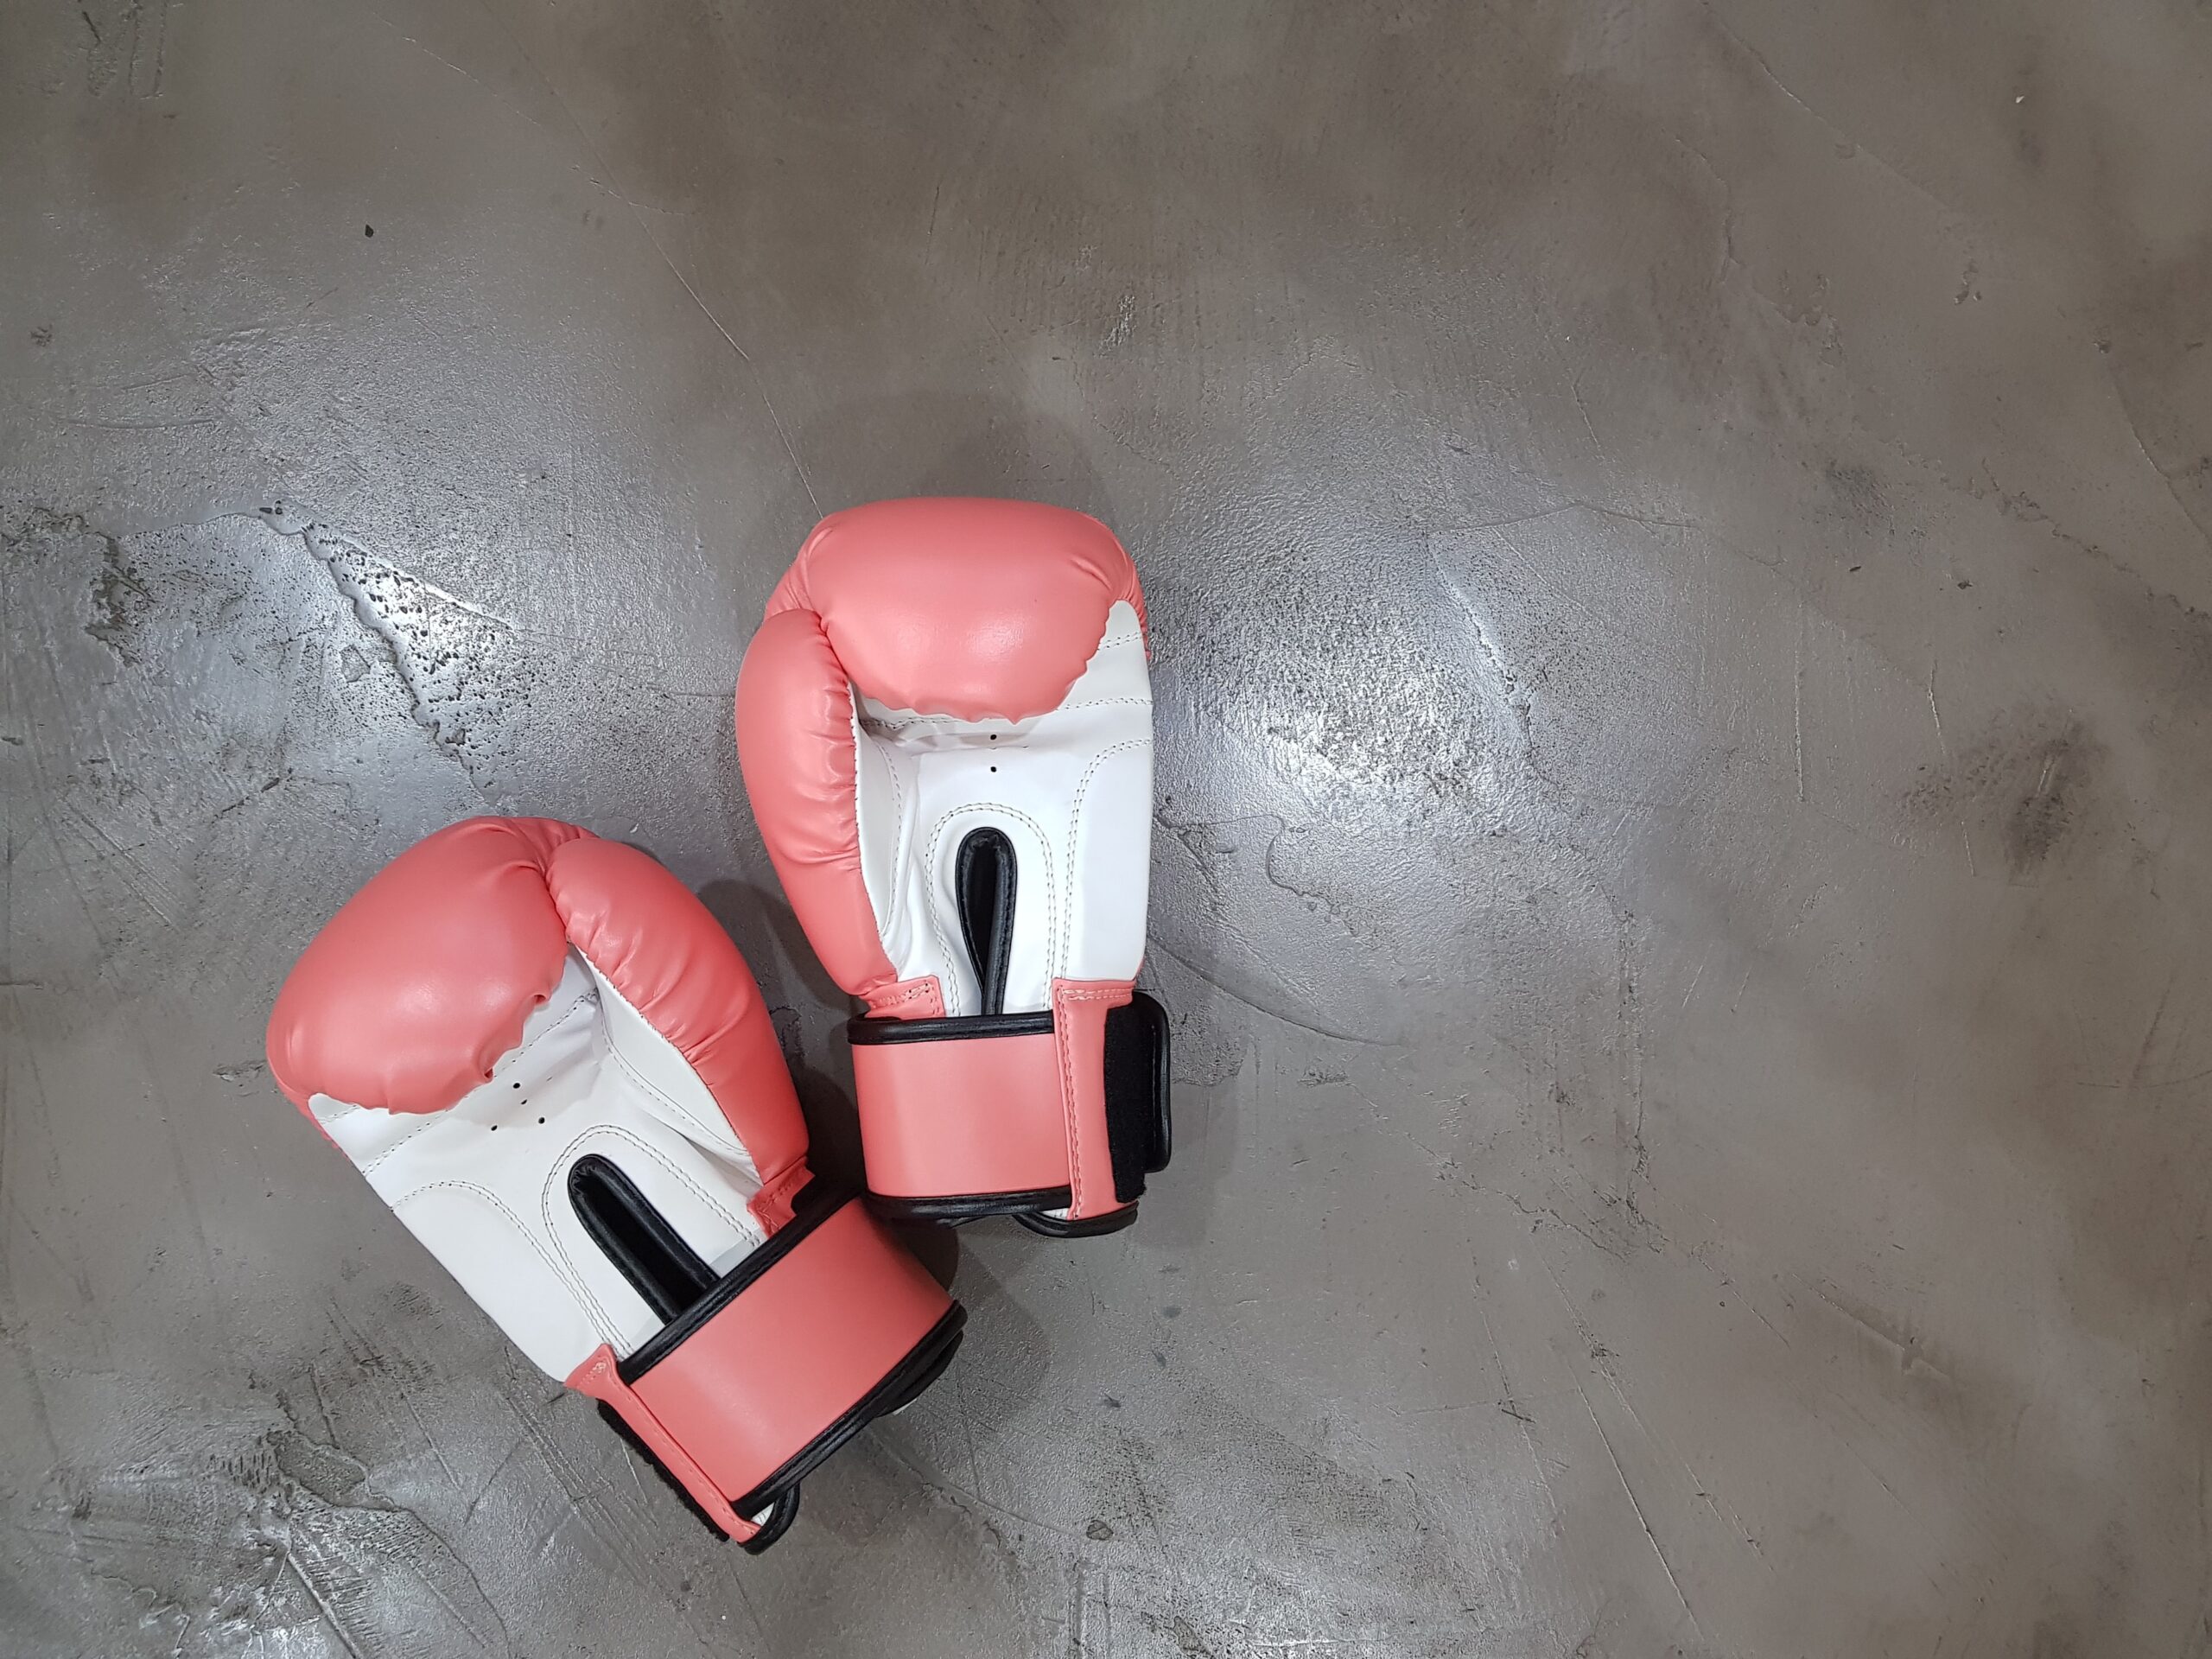 a pair of pink and white boxing gloves lie on a concrete surface